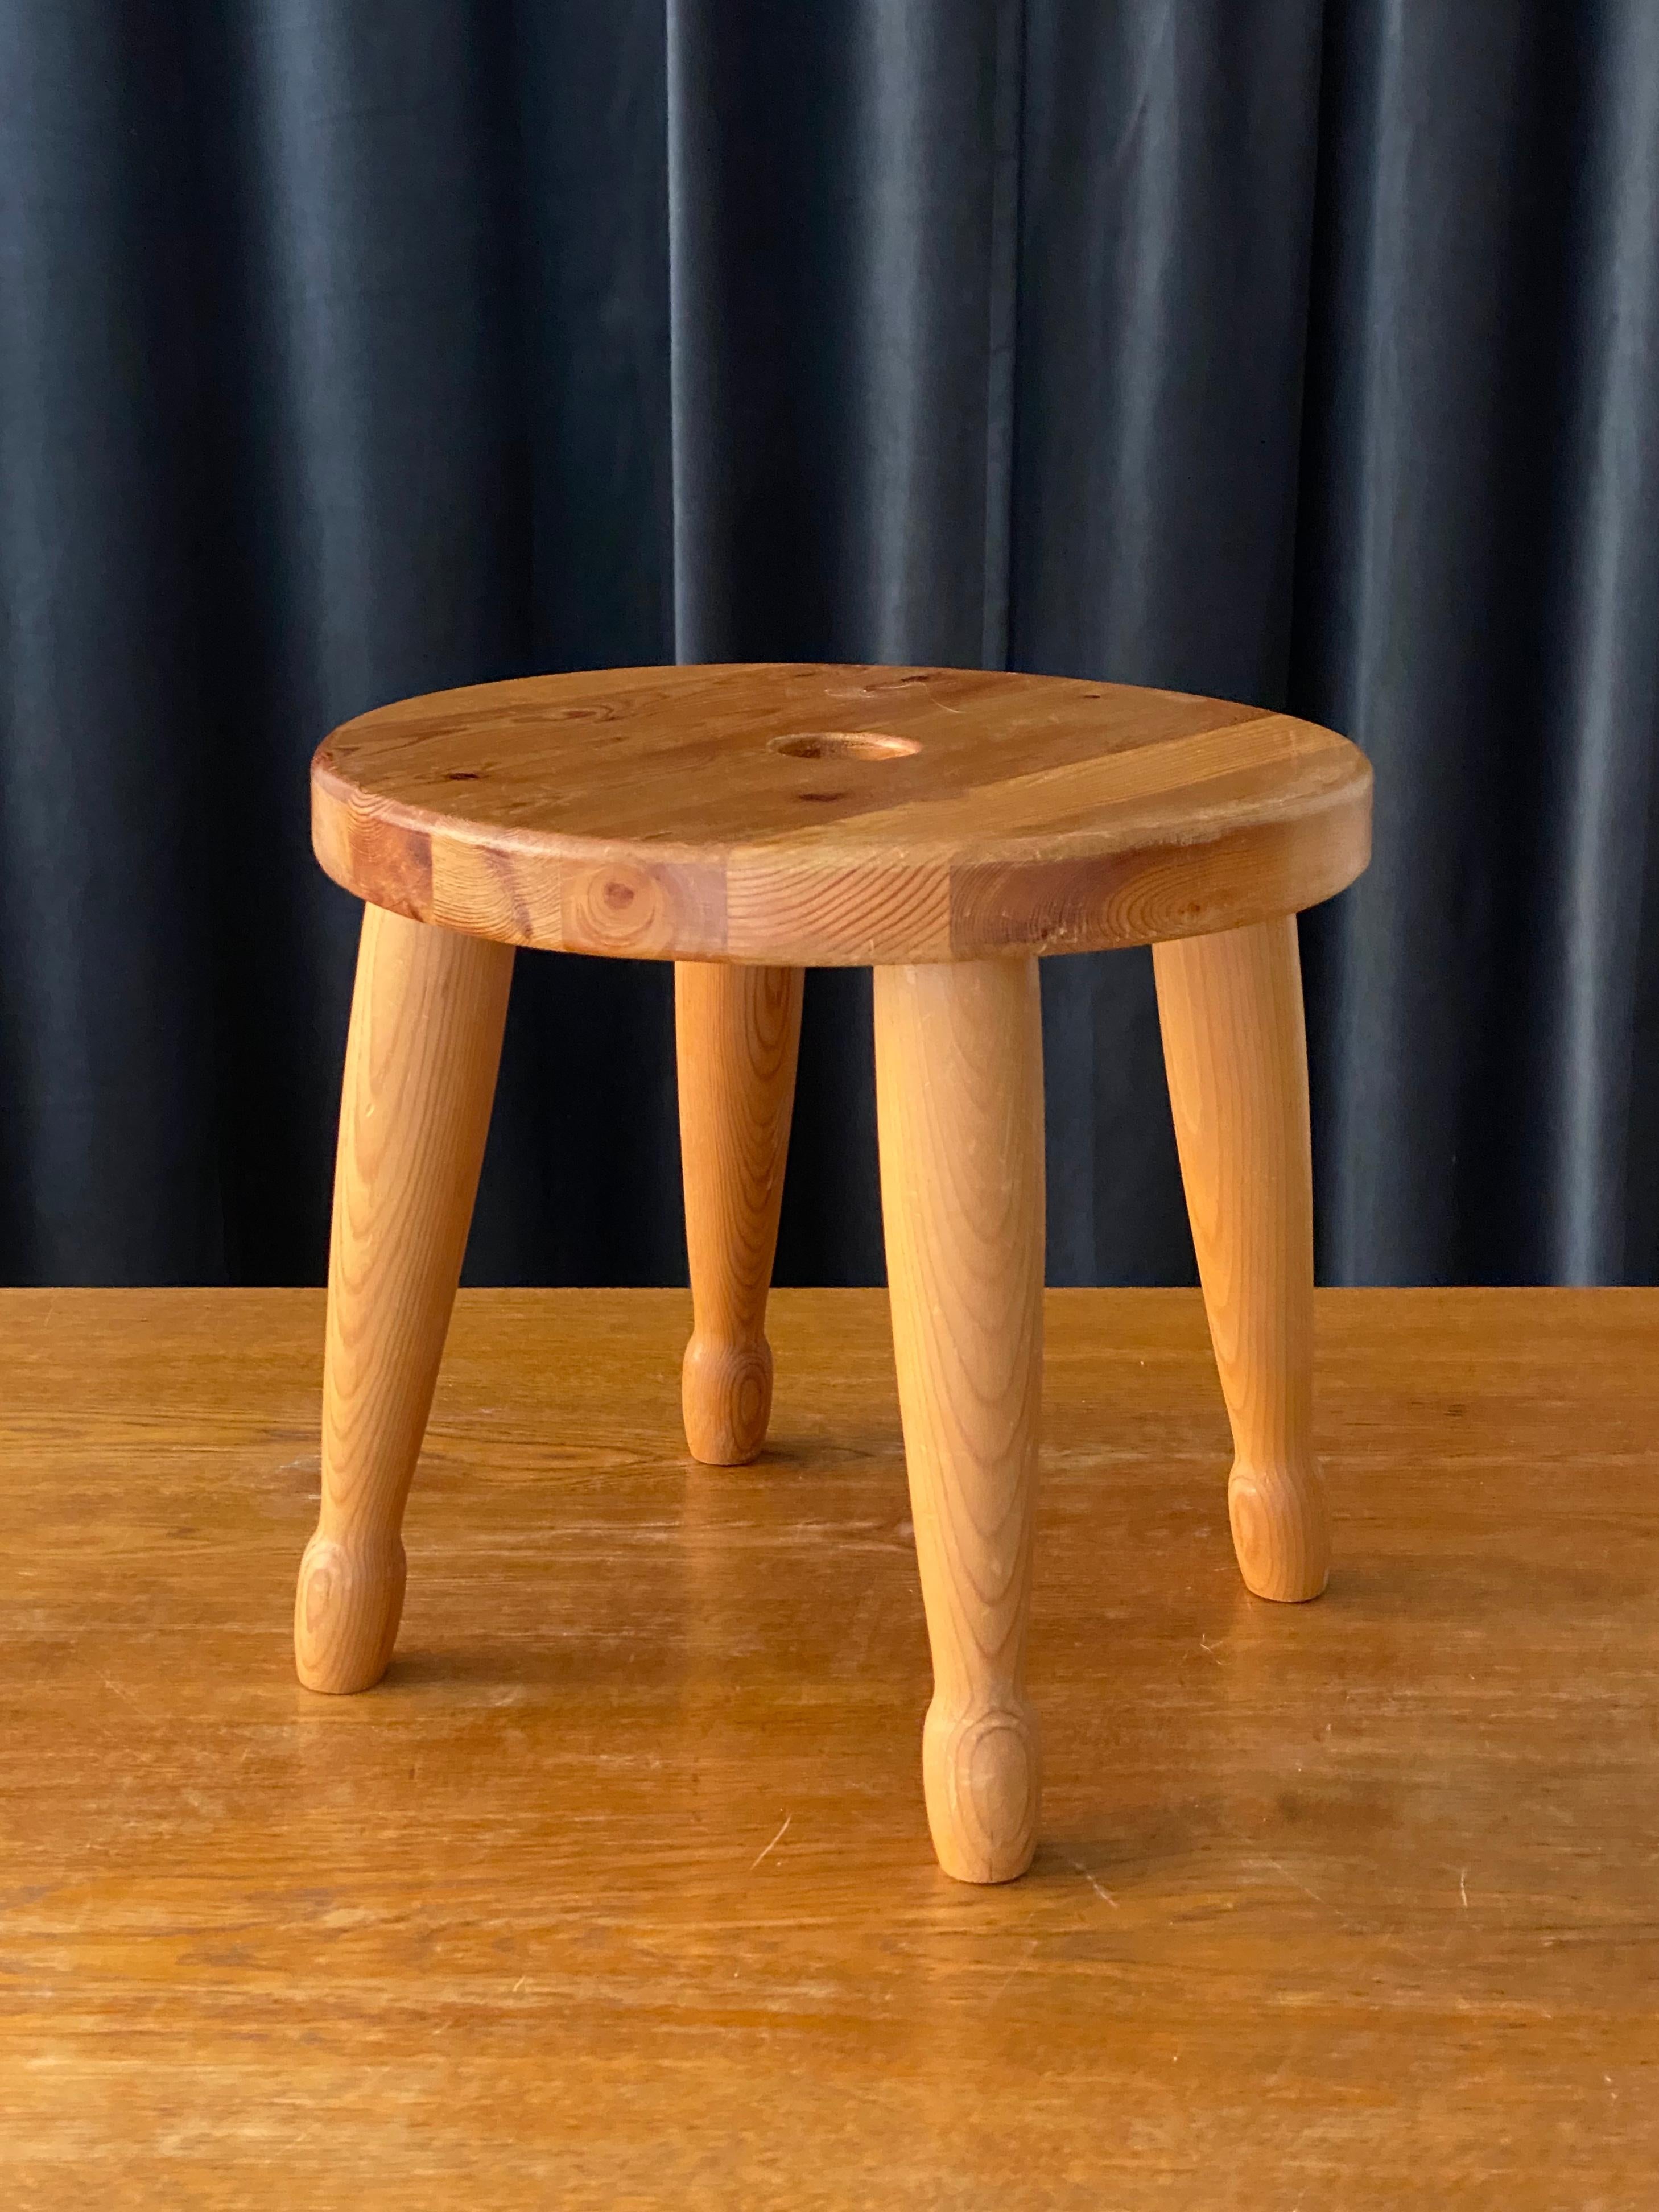 Oragnic modernist stool by an unknown designer. In pine.

Other designers of the period include Pierre Chapo, Pierre Jeanneret, Charlotte Perriand and Axel Einar Hjorth.